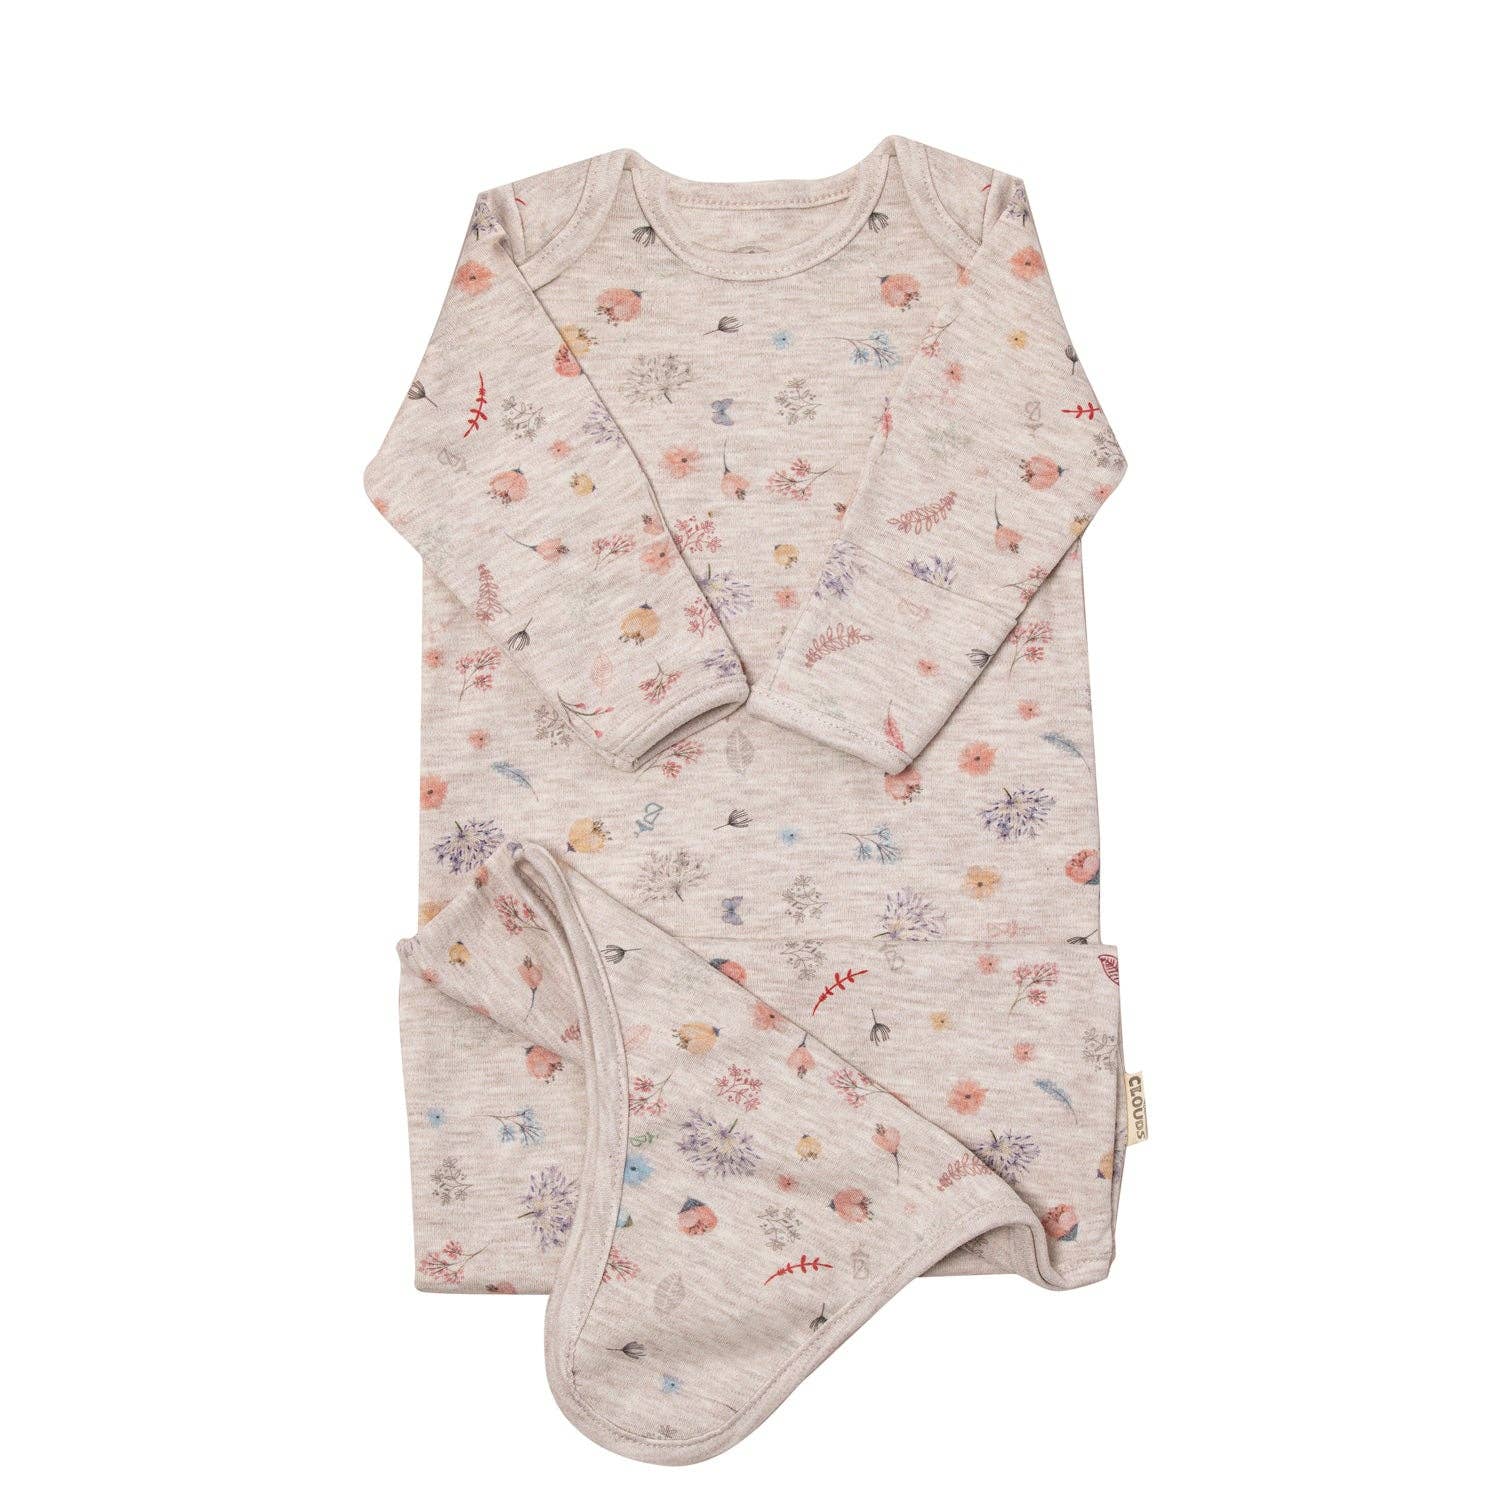 Sleep Gown - Nature Themed Beige: One Size (0-12 Months)